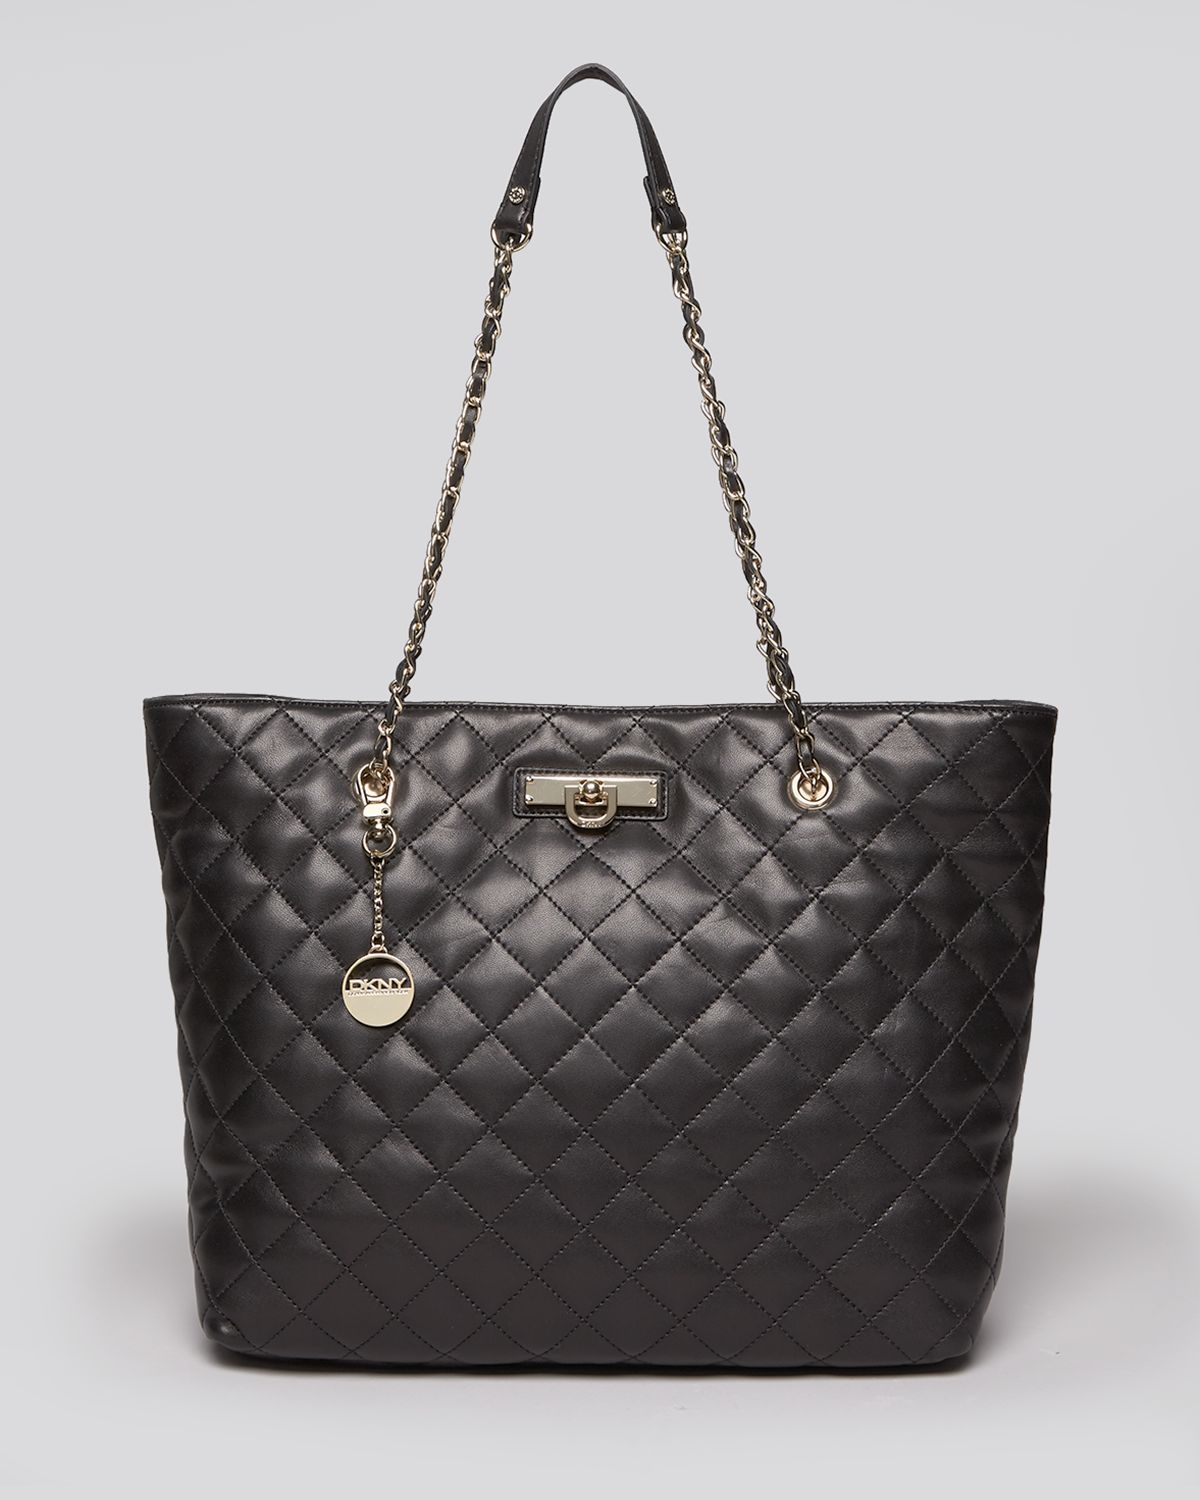 DKNY Tote Quilted Nappa East West Shopper in Black - Lyst